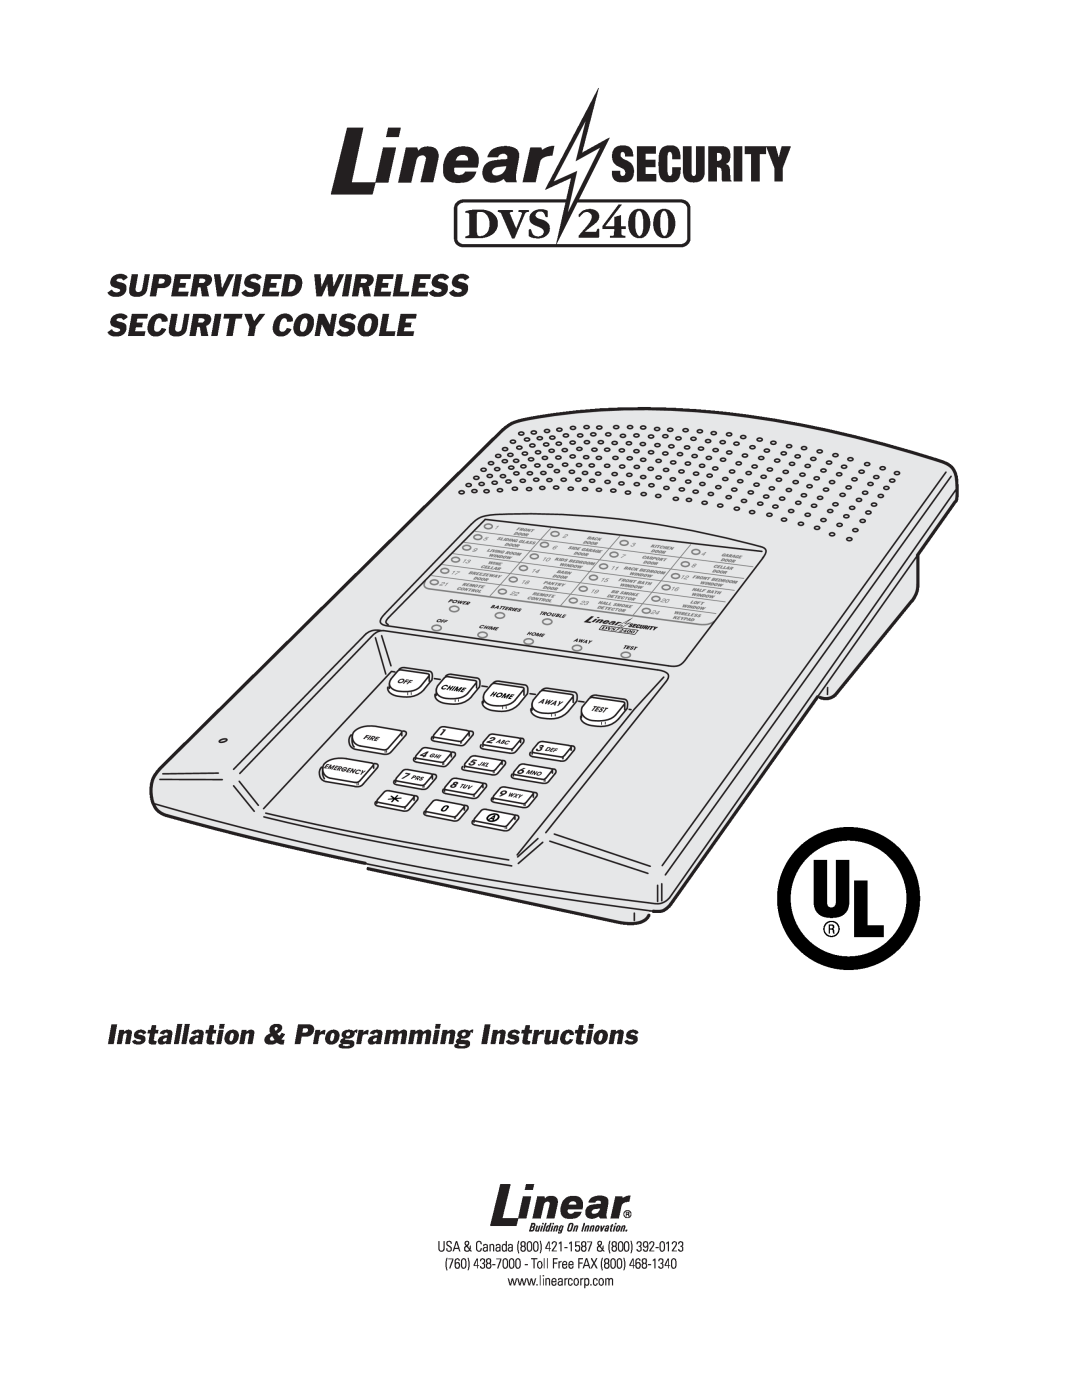 Linear DVS-2400 manual Supervised Wireless Security Console, Installation & Programming Instructions, USA & Canada 